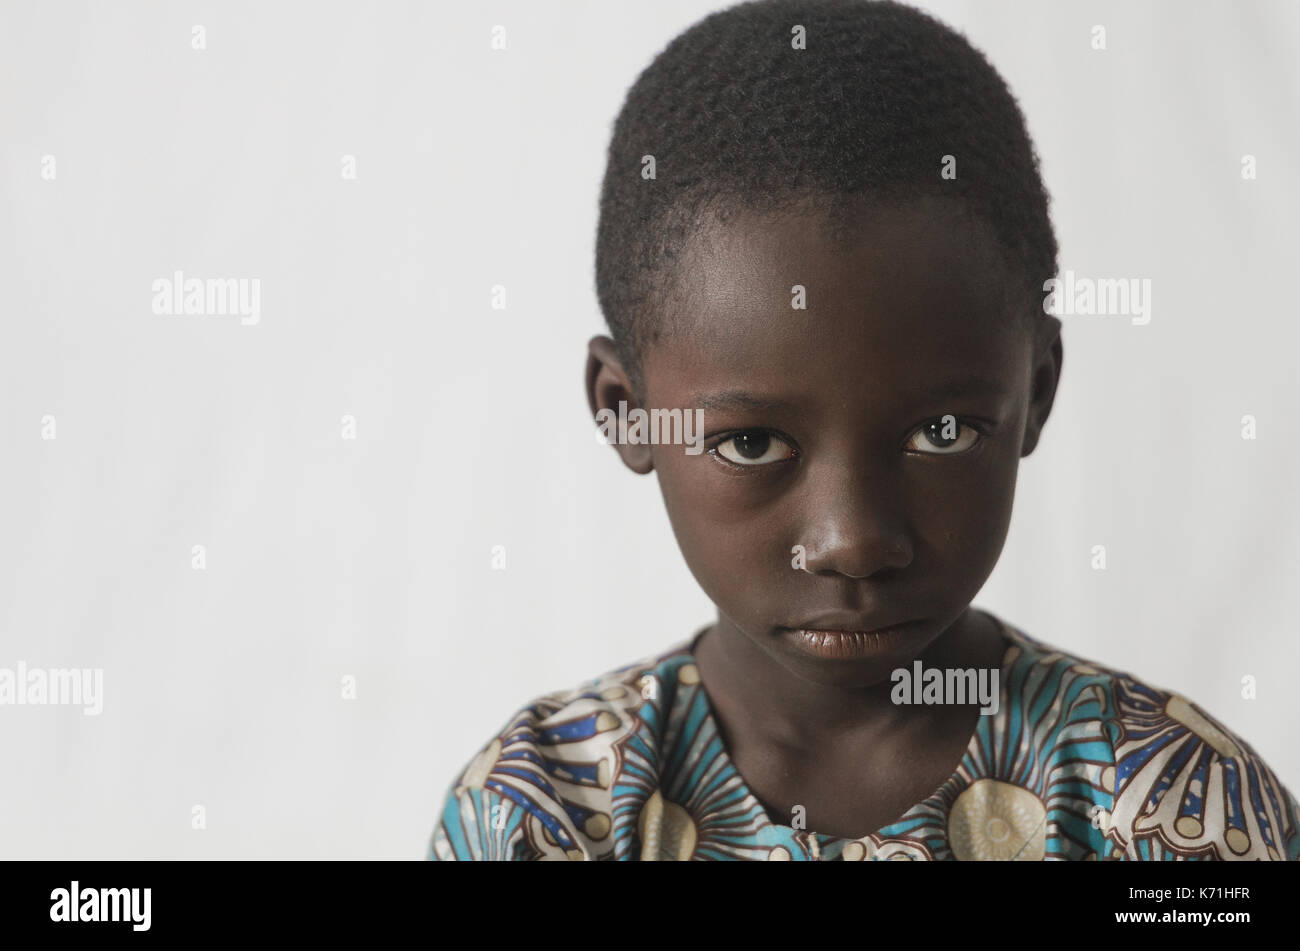 Angry young African boy isolated on white, showing his face for a portrait Stock Photo